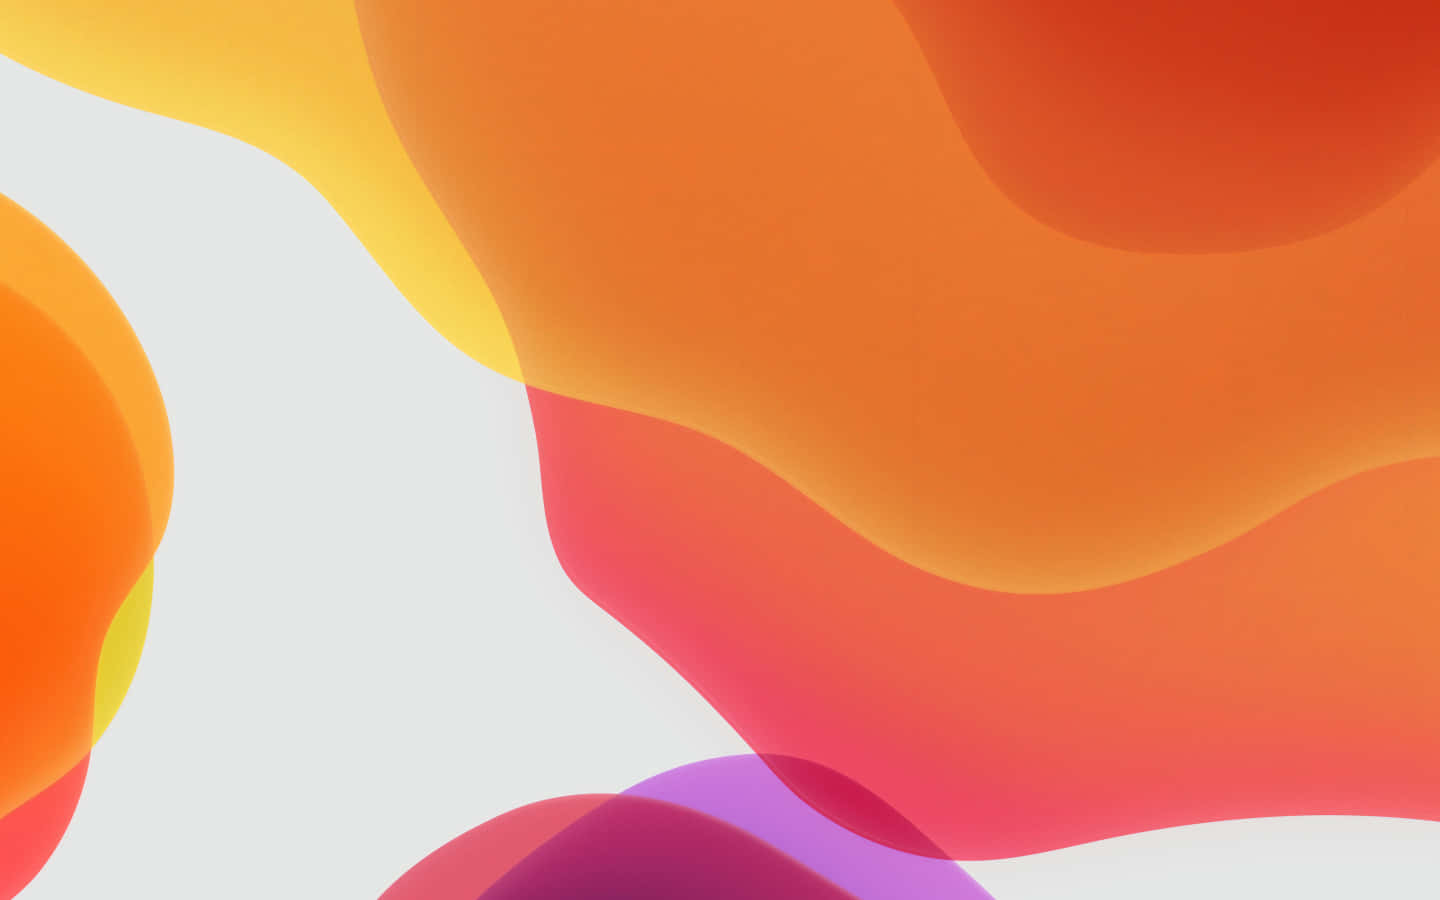 An Abstract Background With Colorful Shapes